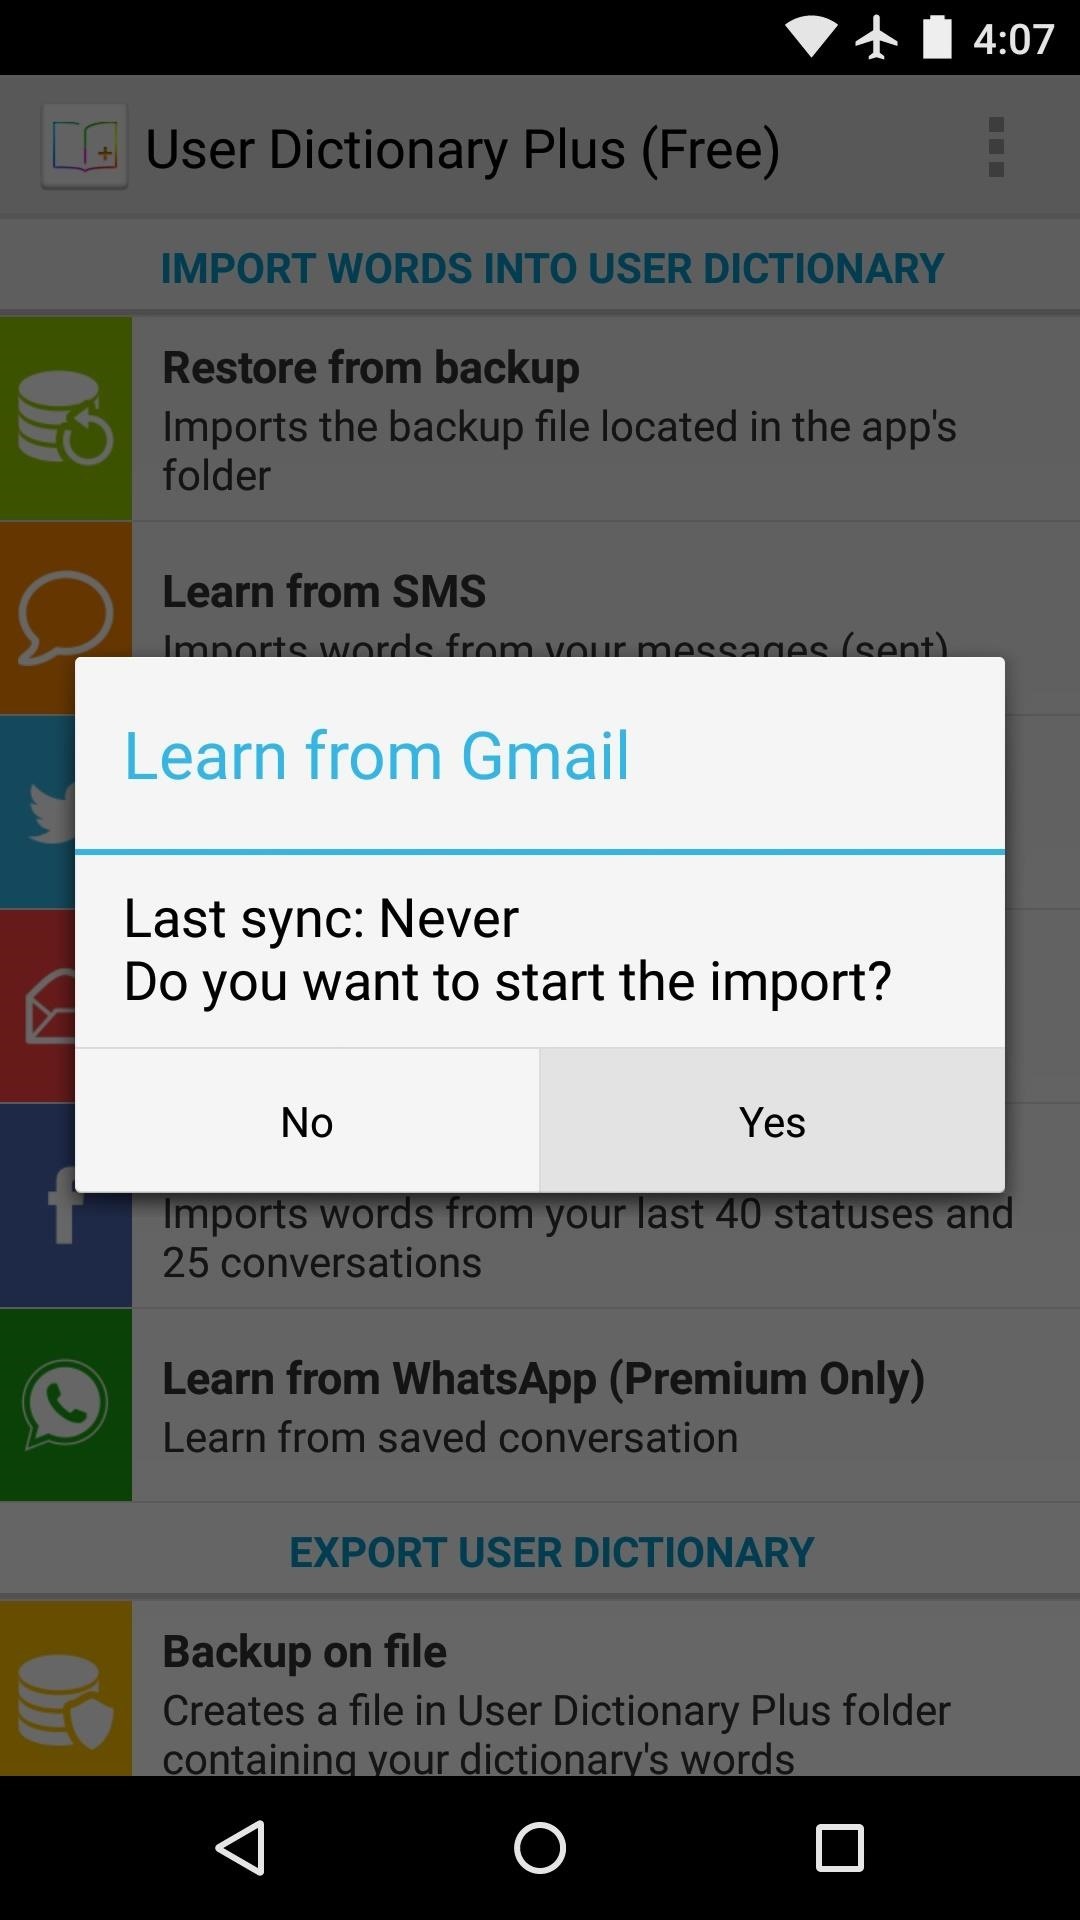 Personalize Your Android's Dictionary with Words from Your Emails, Texts, & Social Media